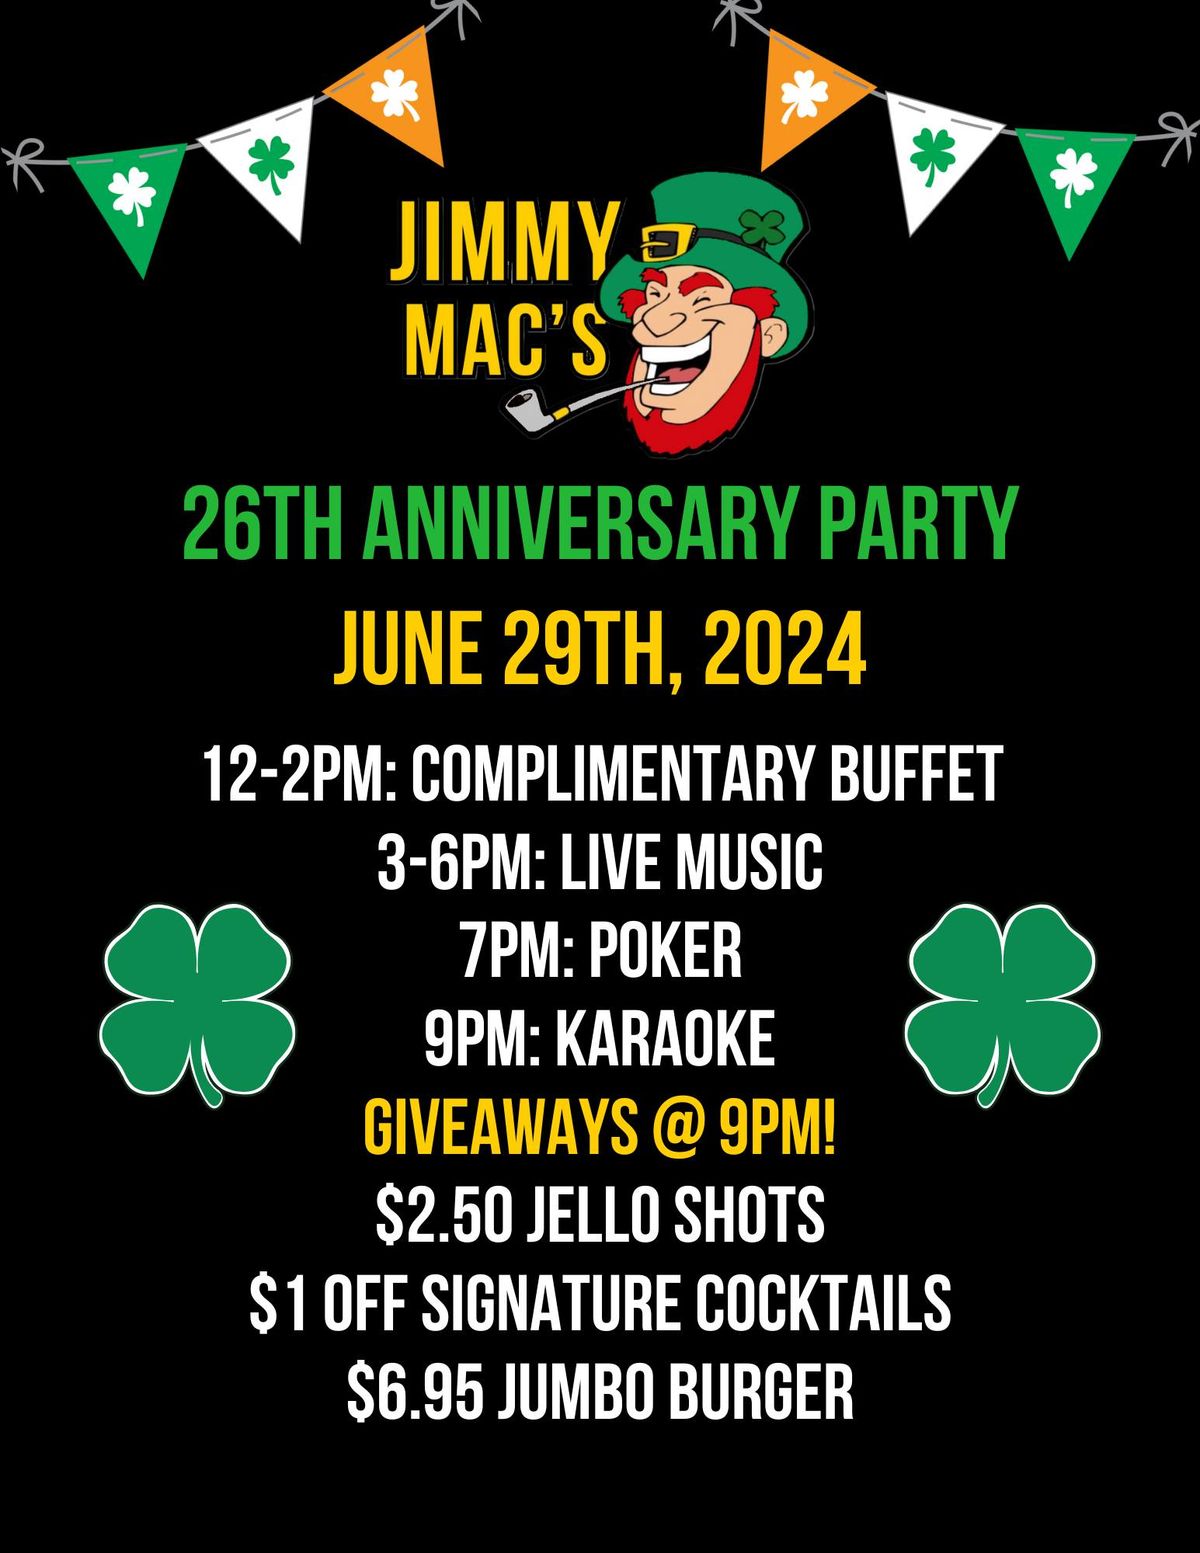 Jimmy Mac's 26th Anniversary Party